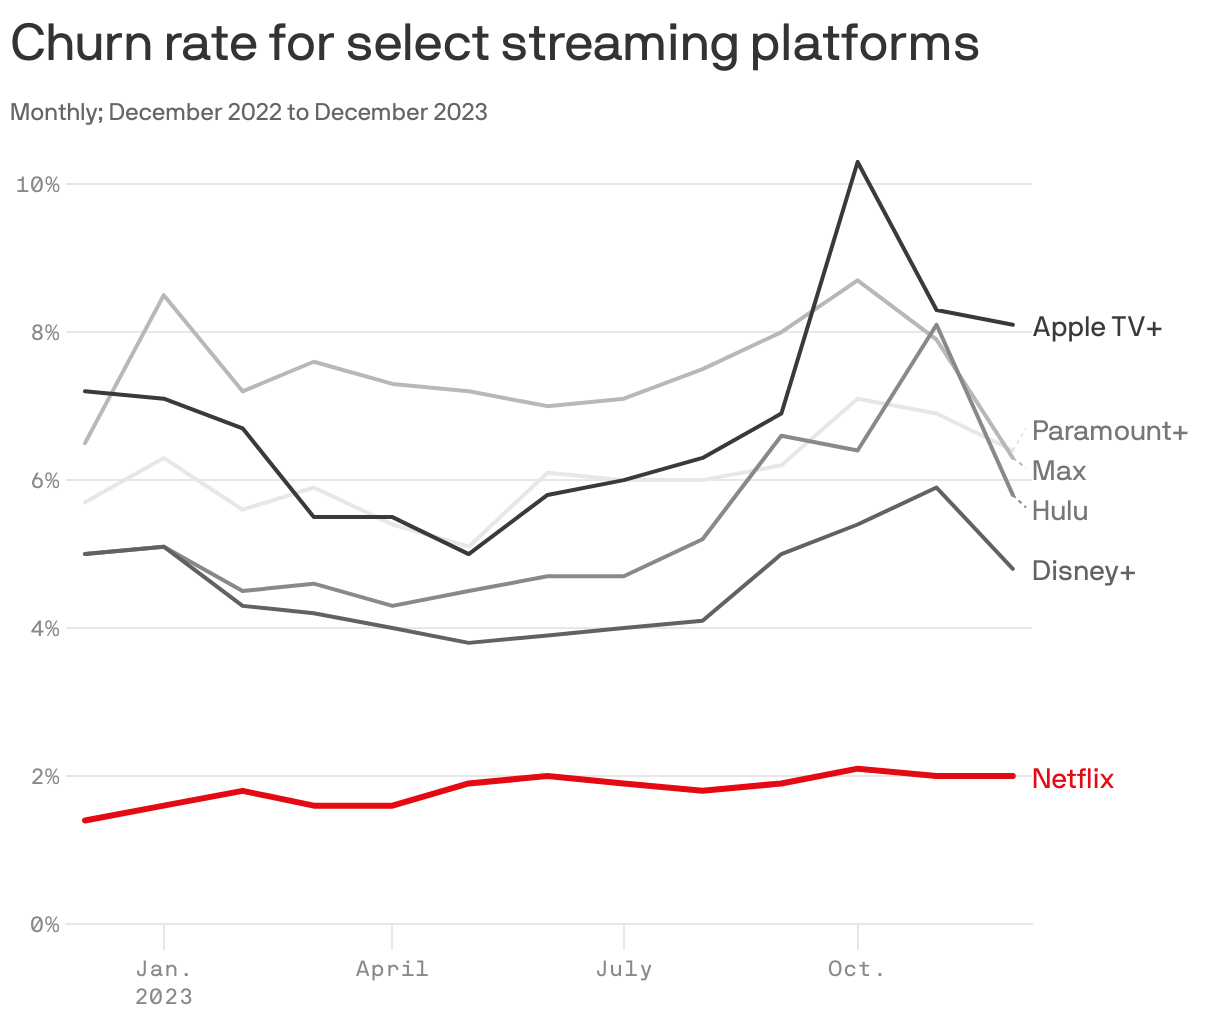 Churn rate for select streaming platforms